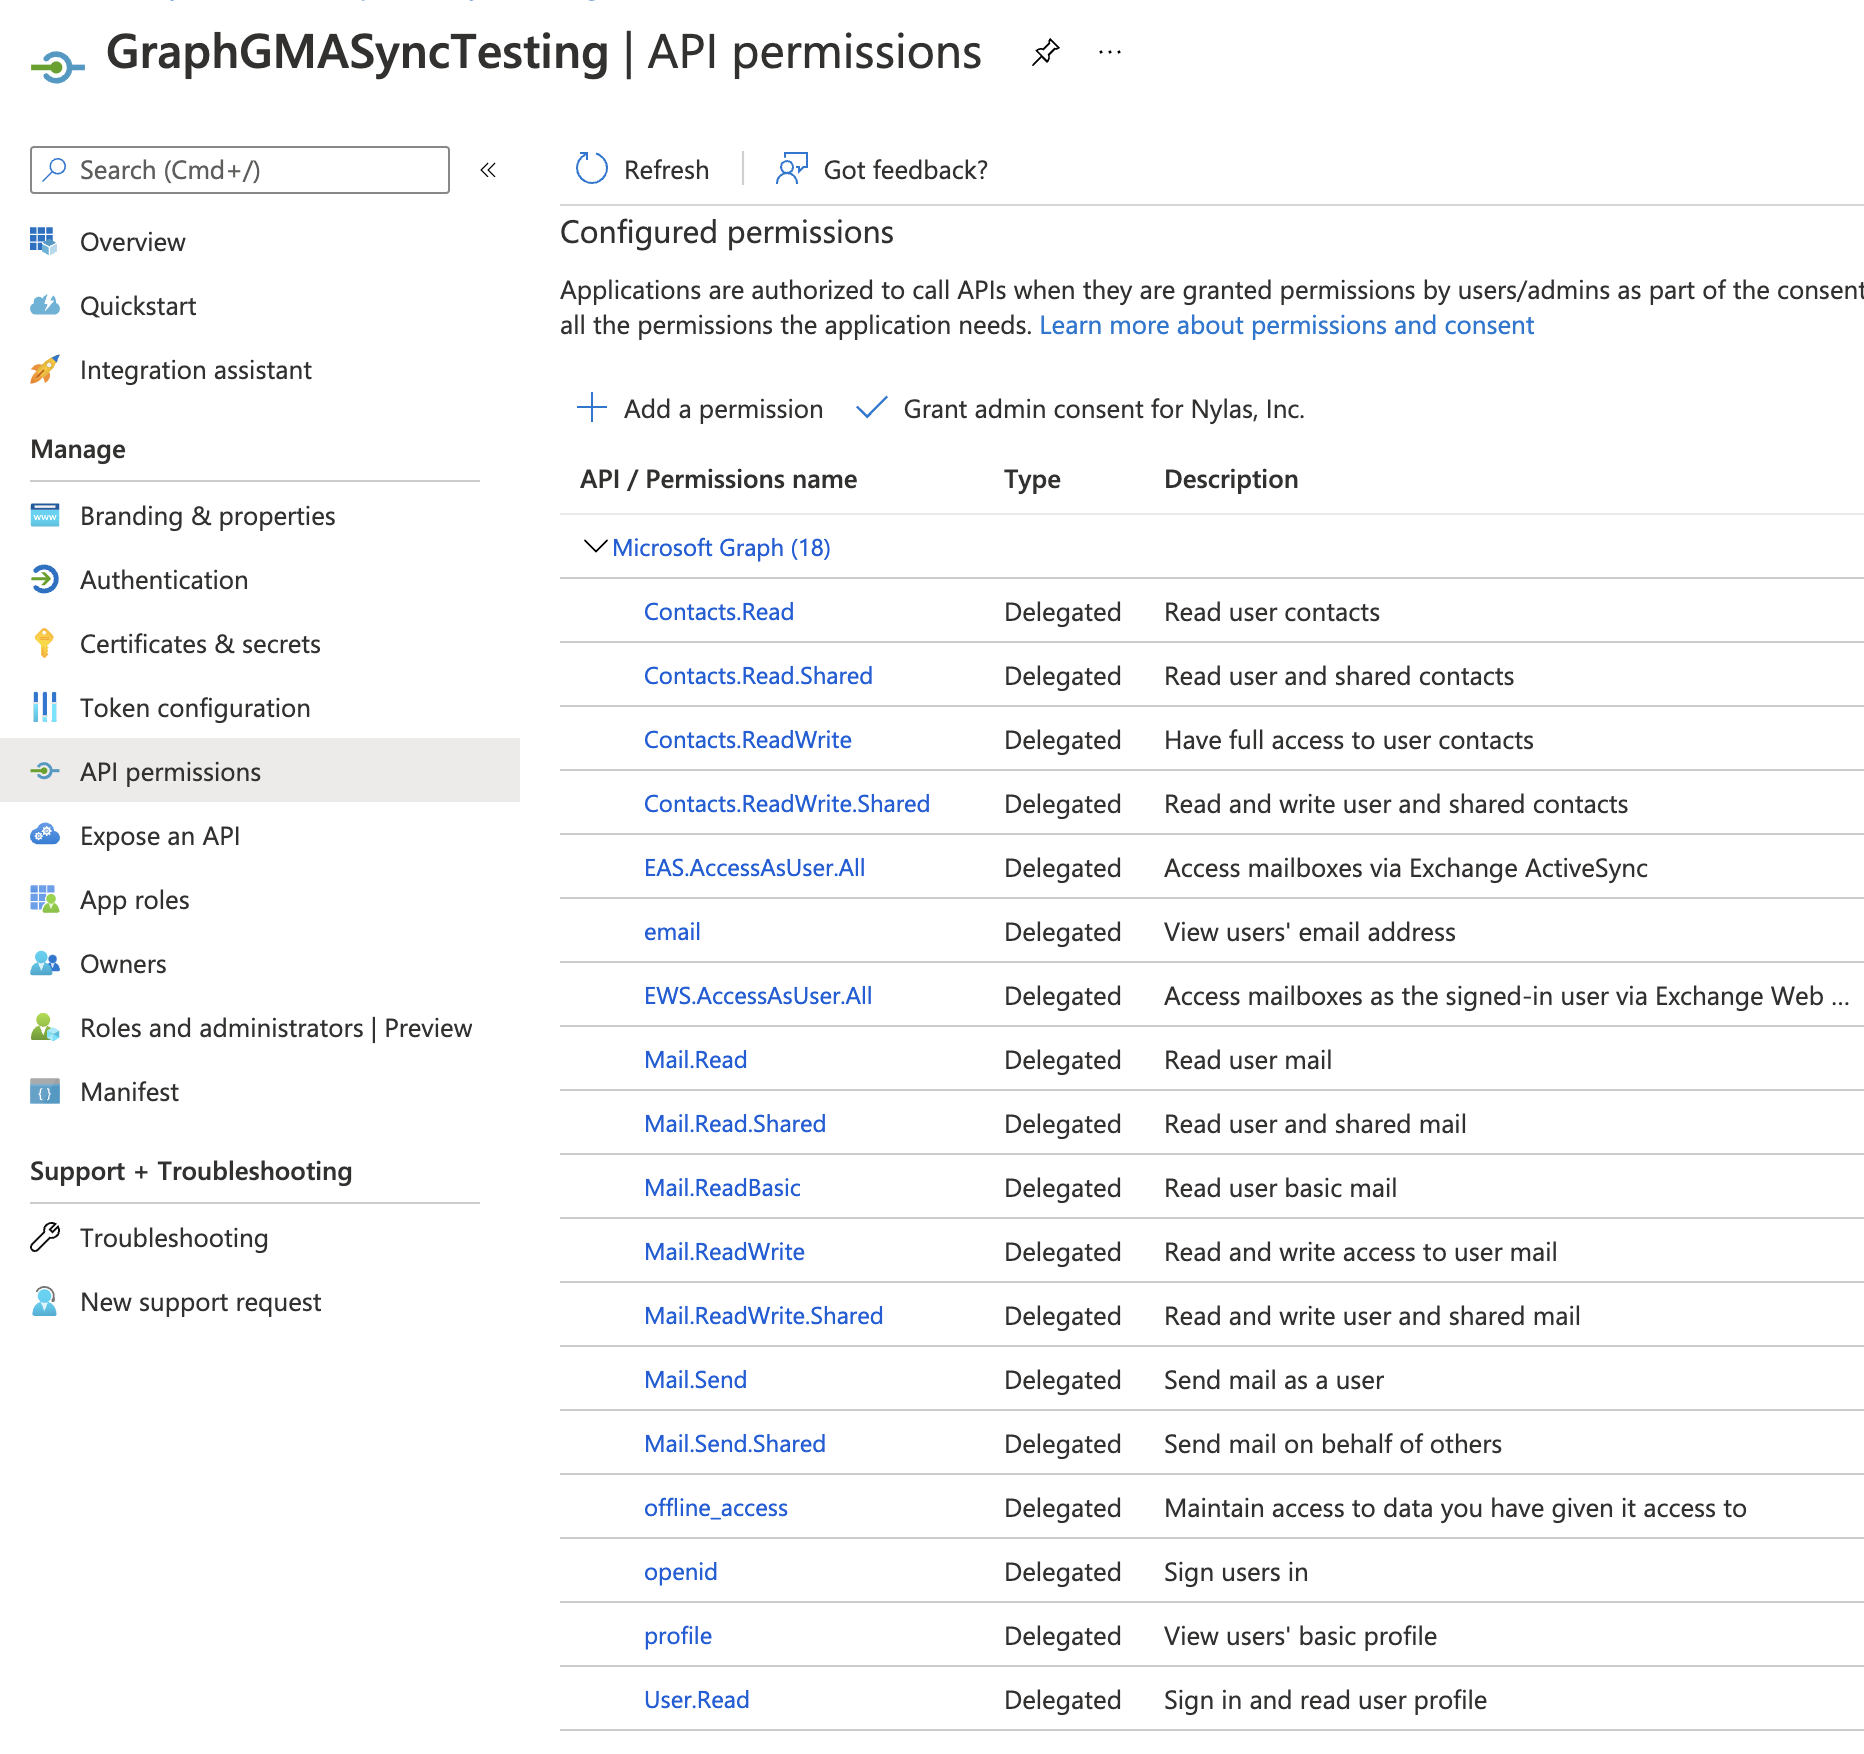 In the Azure App Manage section, the API permissions tab shows configured permissions for Microsoft Graph.